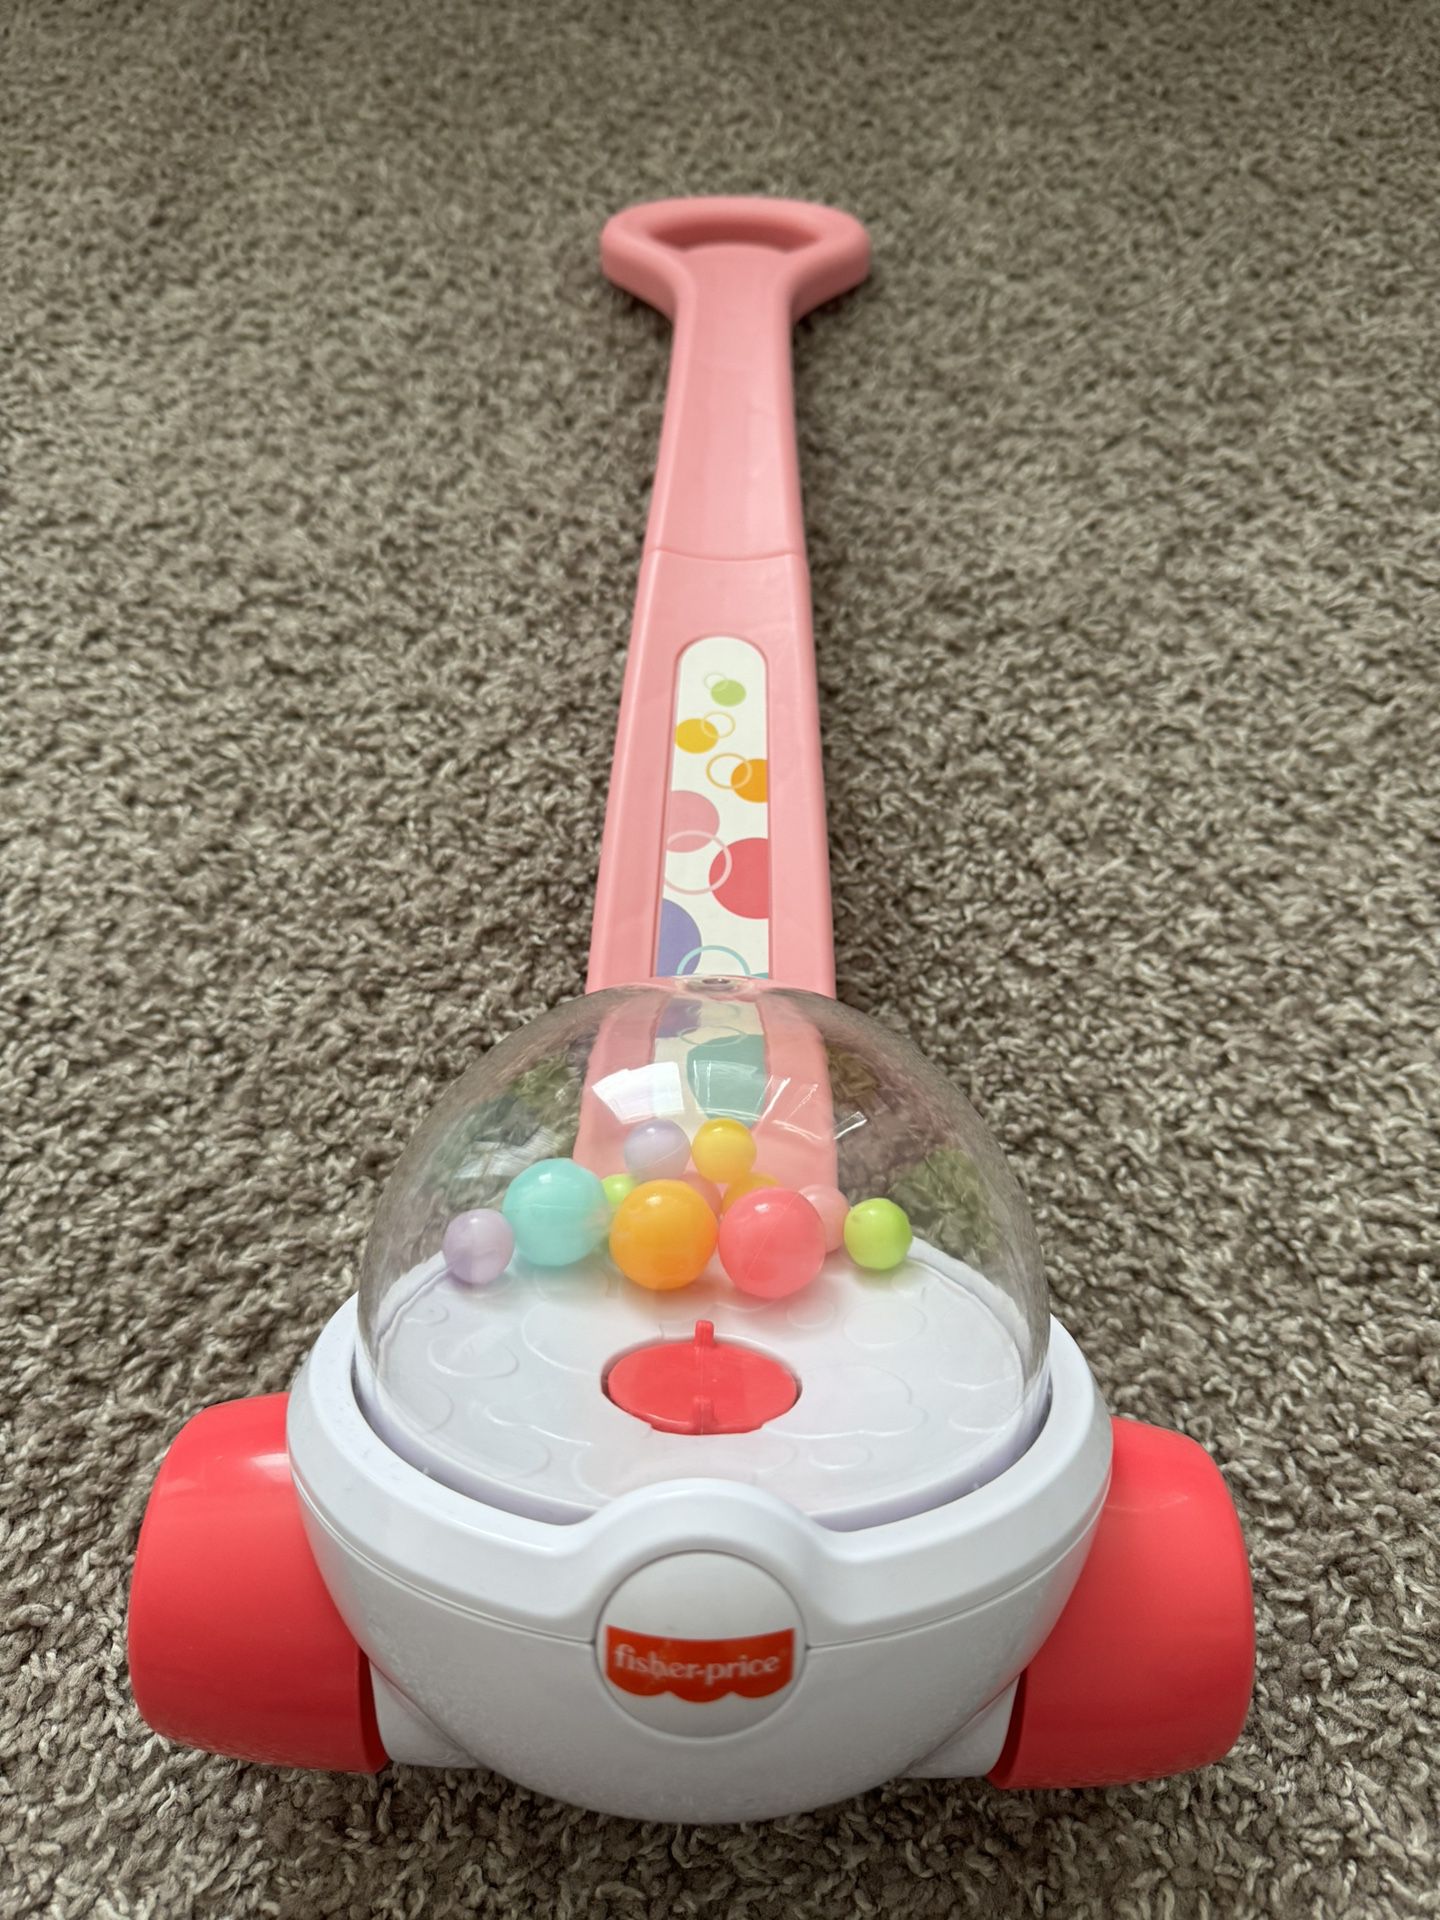 Fisher-Price Corn Popper Push Toy with Ball-Popping Action for Infants and Toddlers (Pink Color)